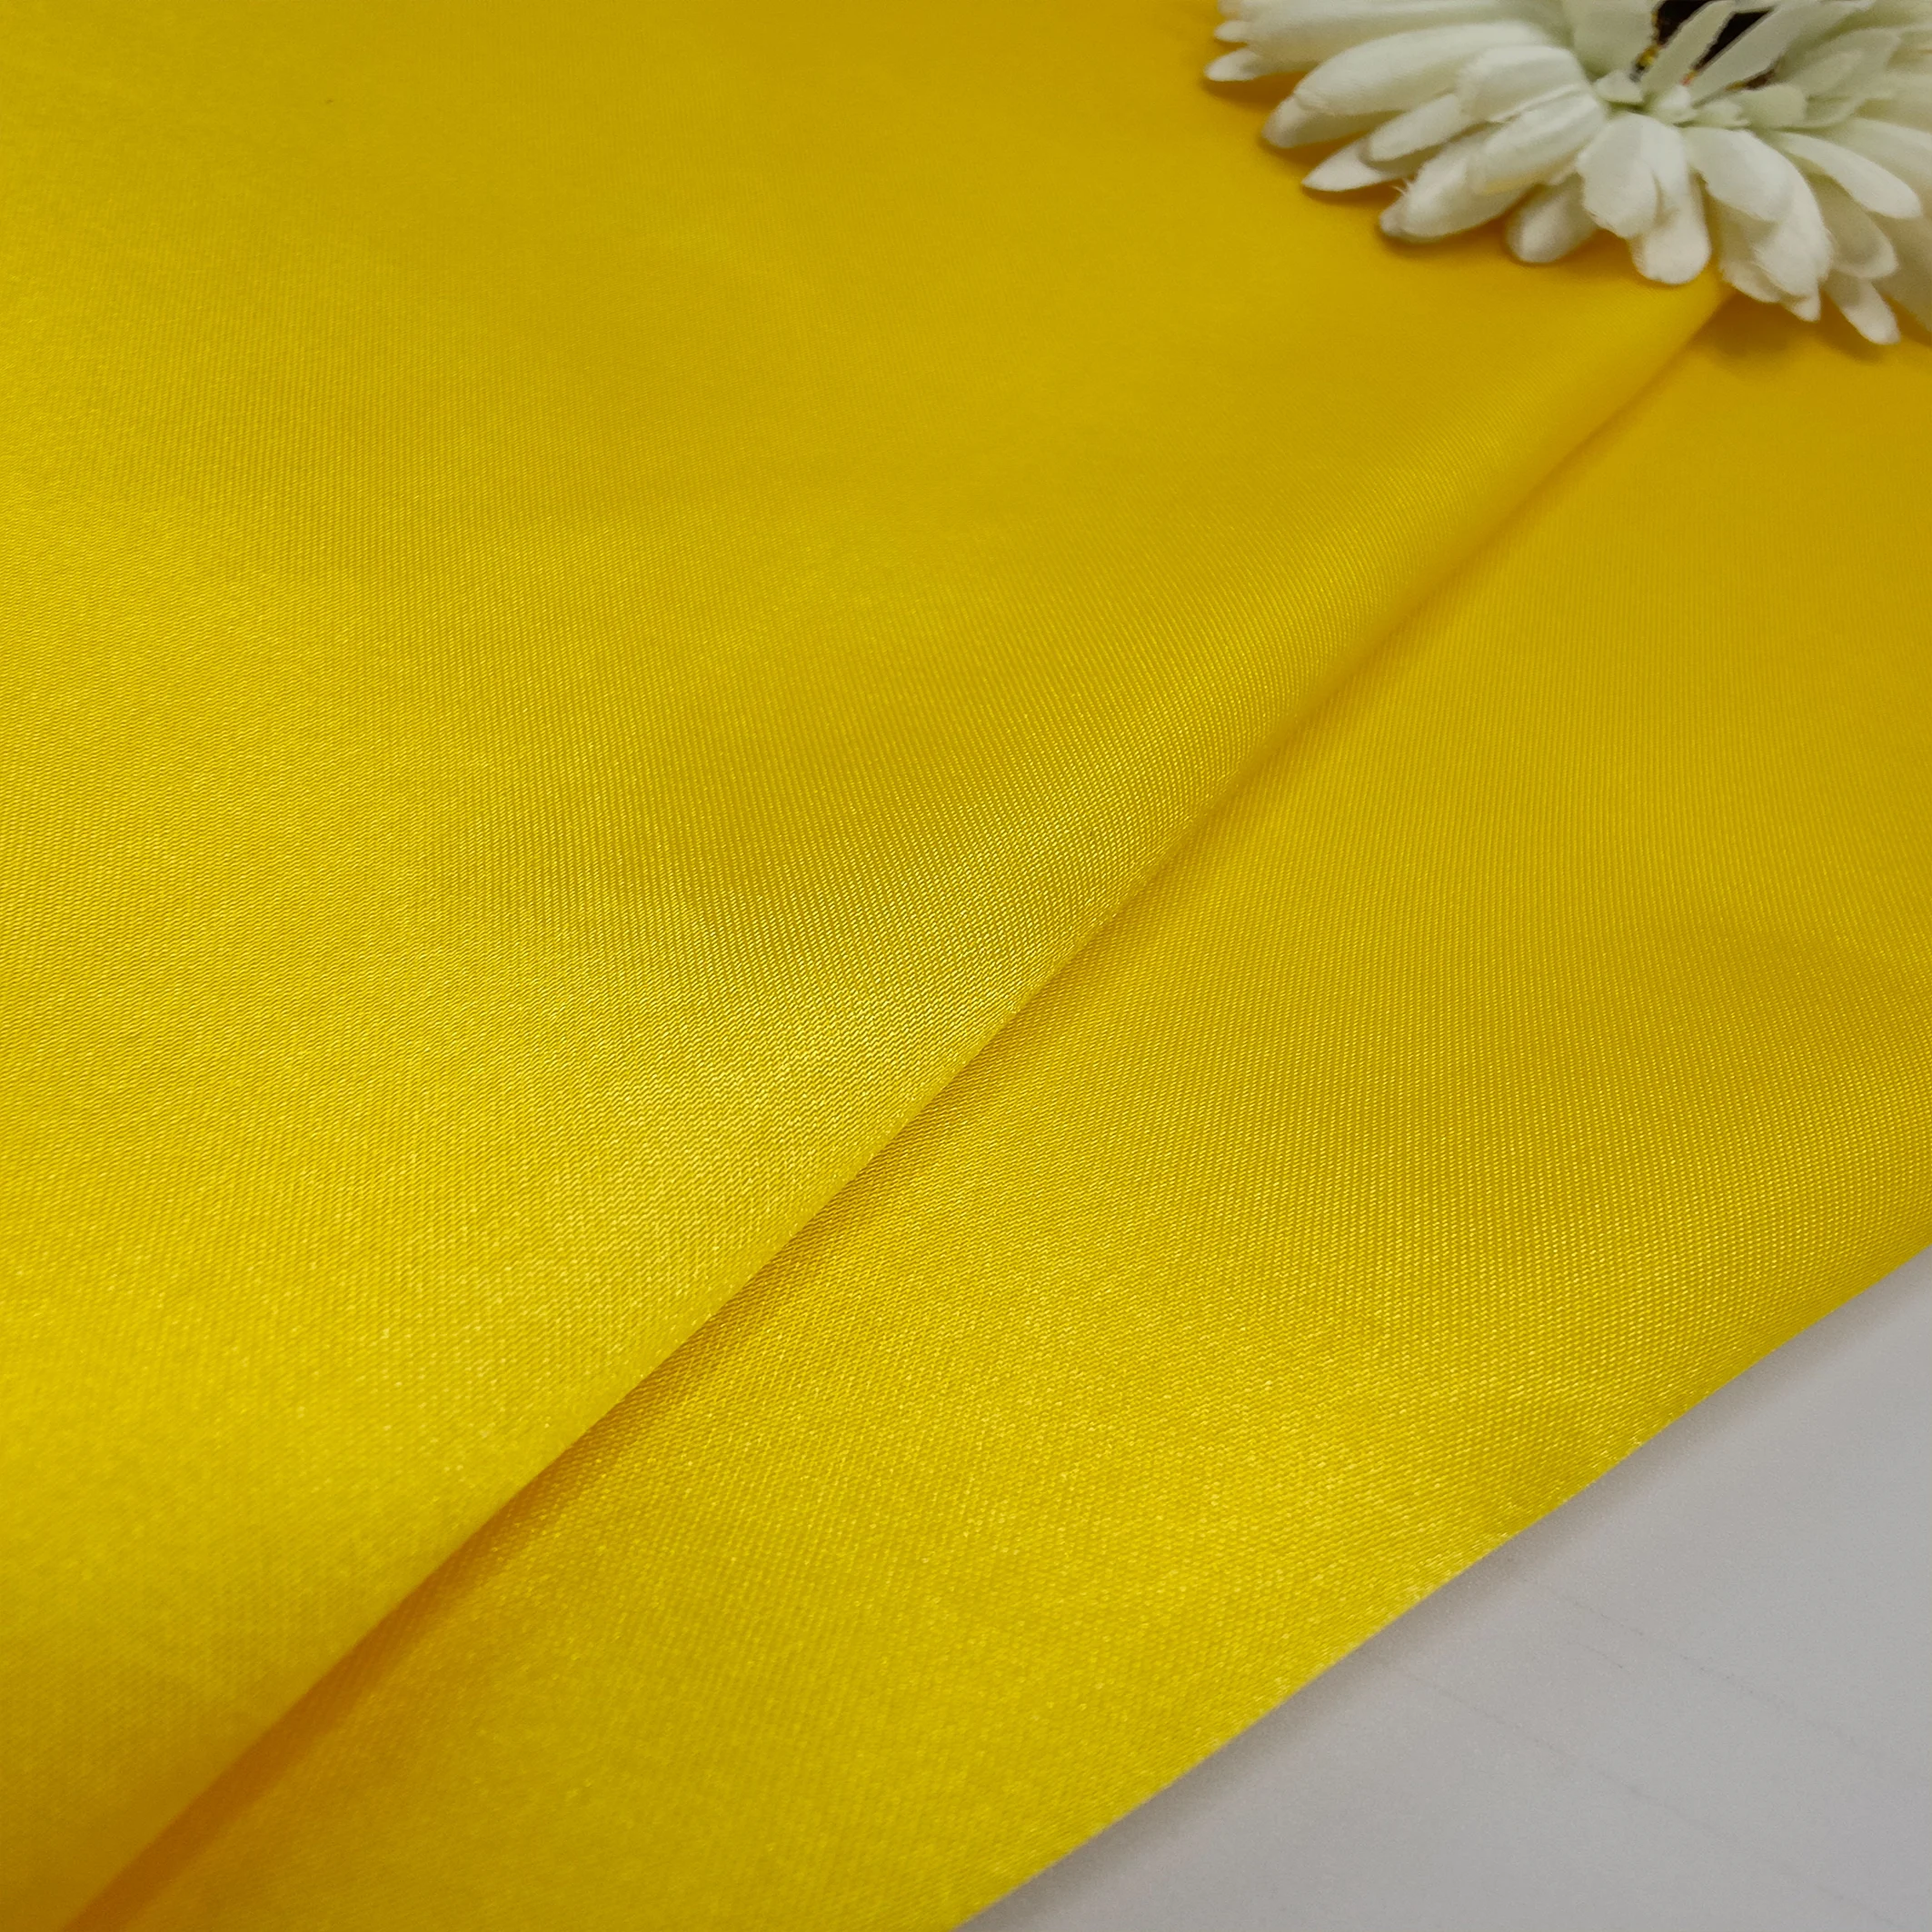 Fashion Wholesale New Design Soft Waterproof Textile Silk 100% Polyester Satin Fabric For Bridal Wedding